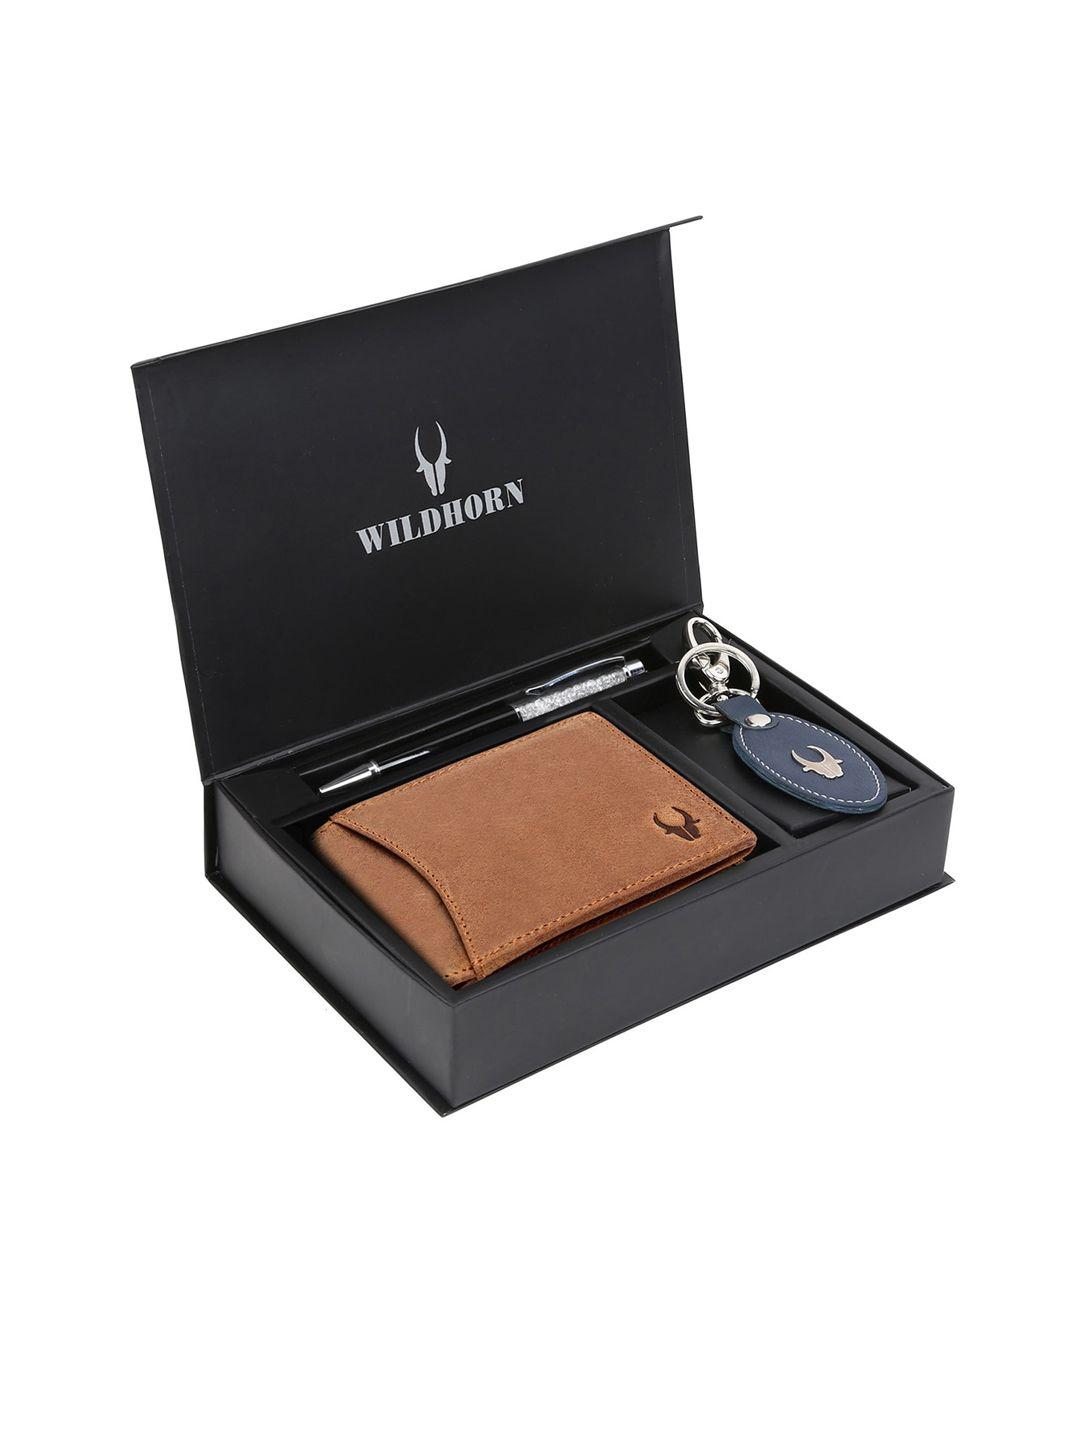 wildhorn men tan brown & blue rfid protected genuine high quality leather accessory gift set